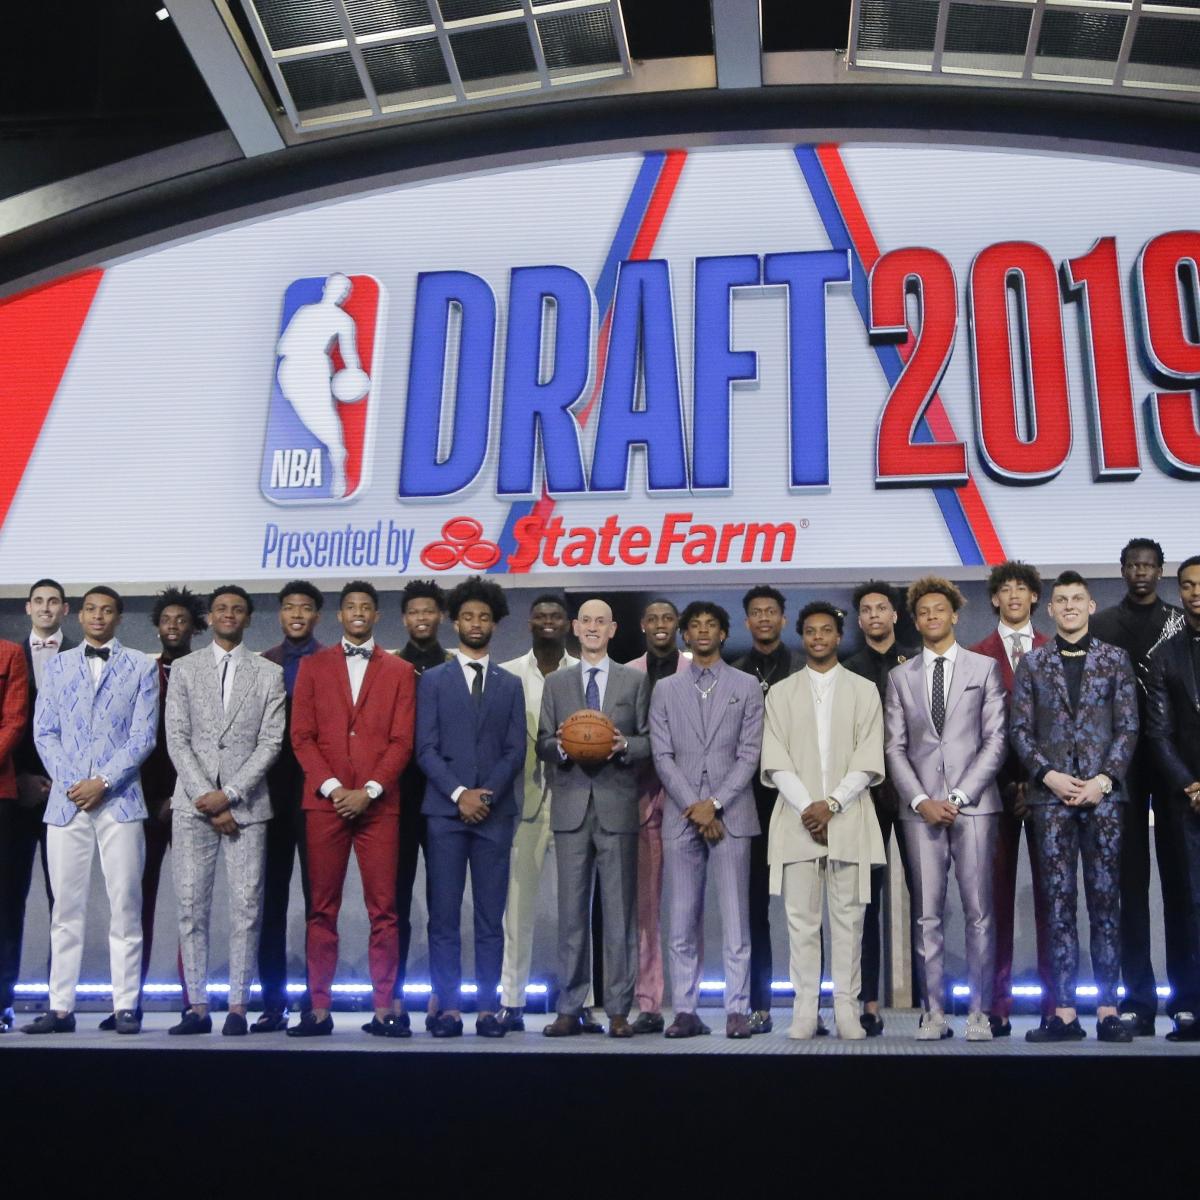 Winners And Losers From 2019 Nba Draft Bleacher Report Latest News Videos And Highlights